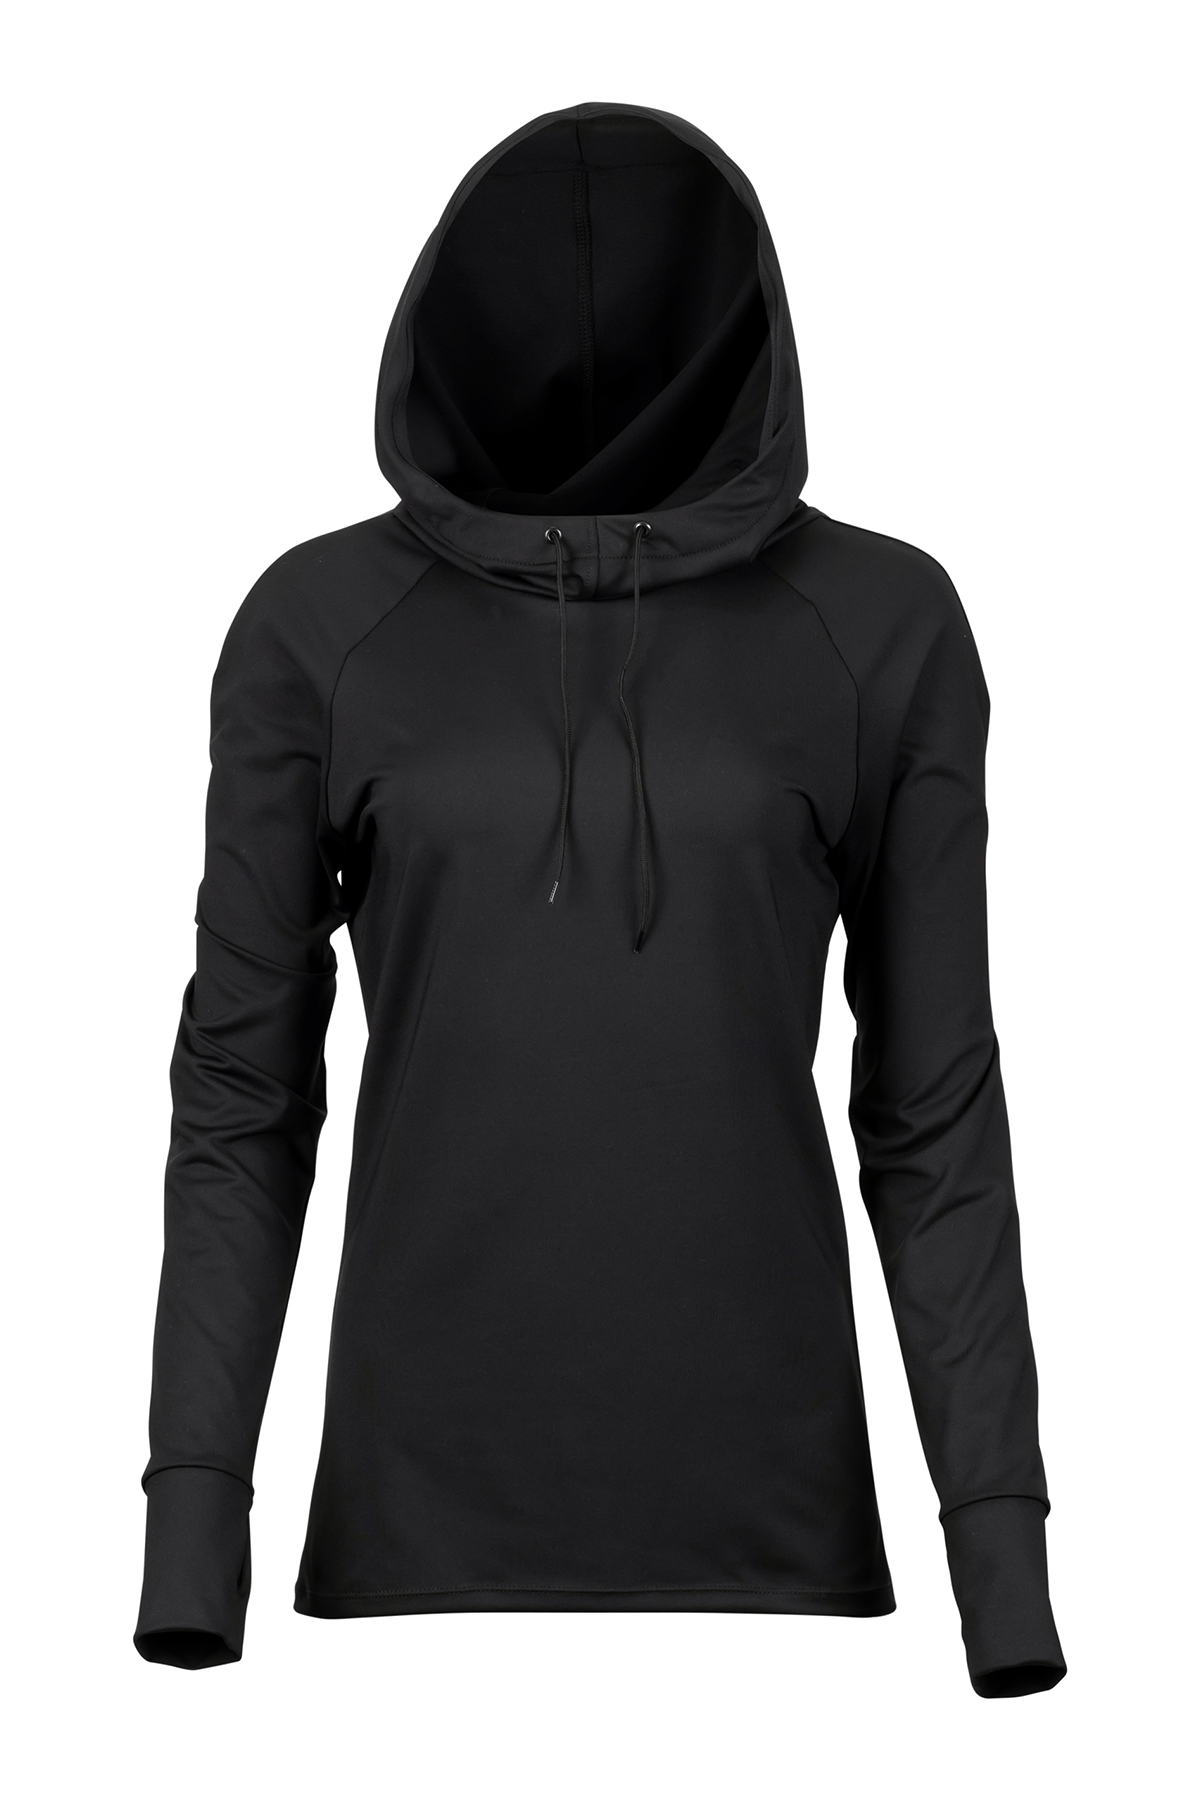 https://www.boathouse.com/cdn/shop/products/women-s-215-hooded-compression-top-rblw750-black-xsm-30961080729690_1800x1800.png?v=1644499372